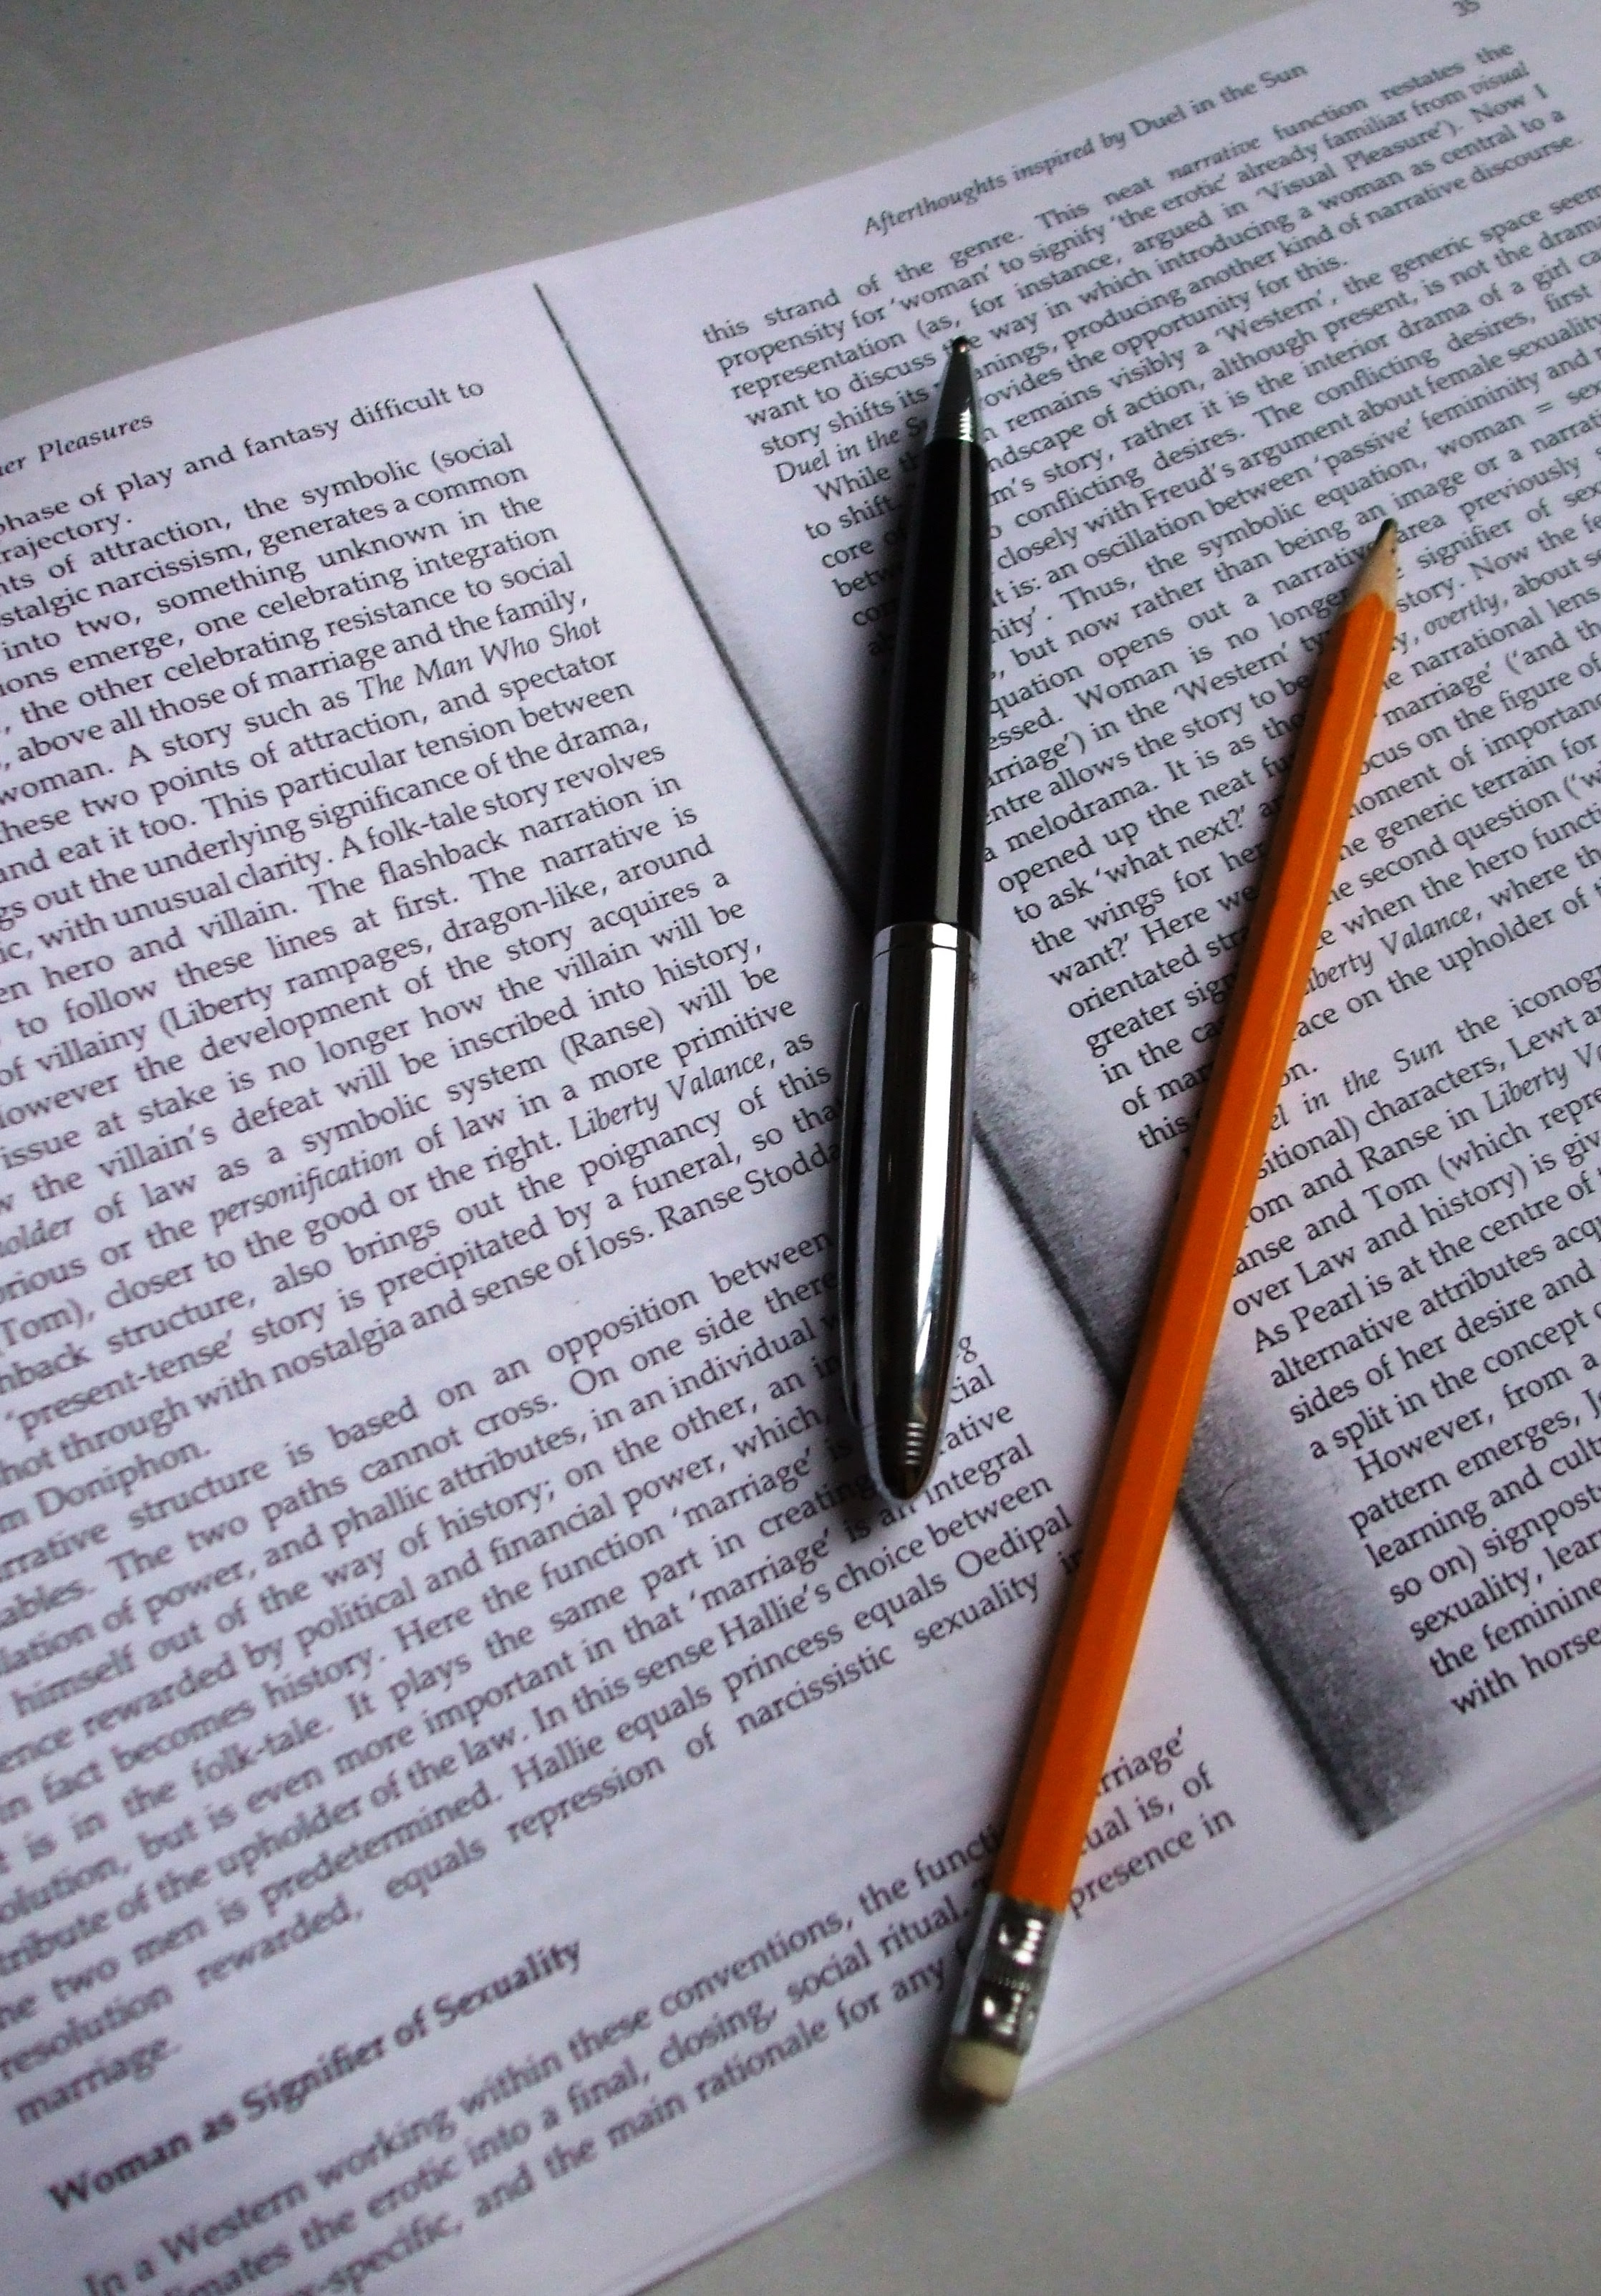 Help for writing an essay